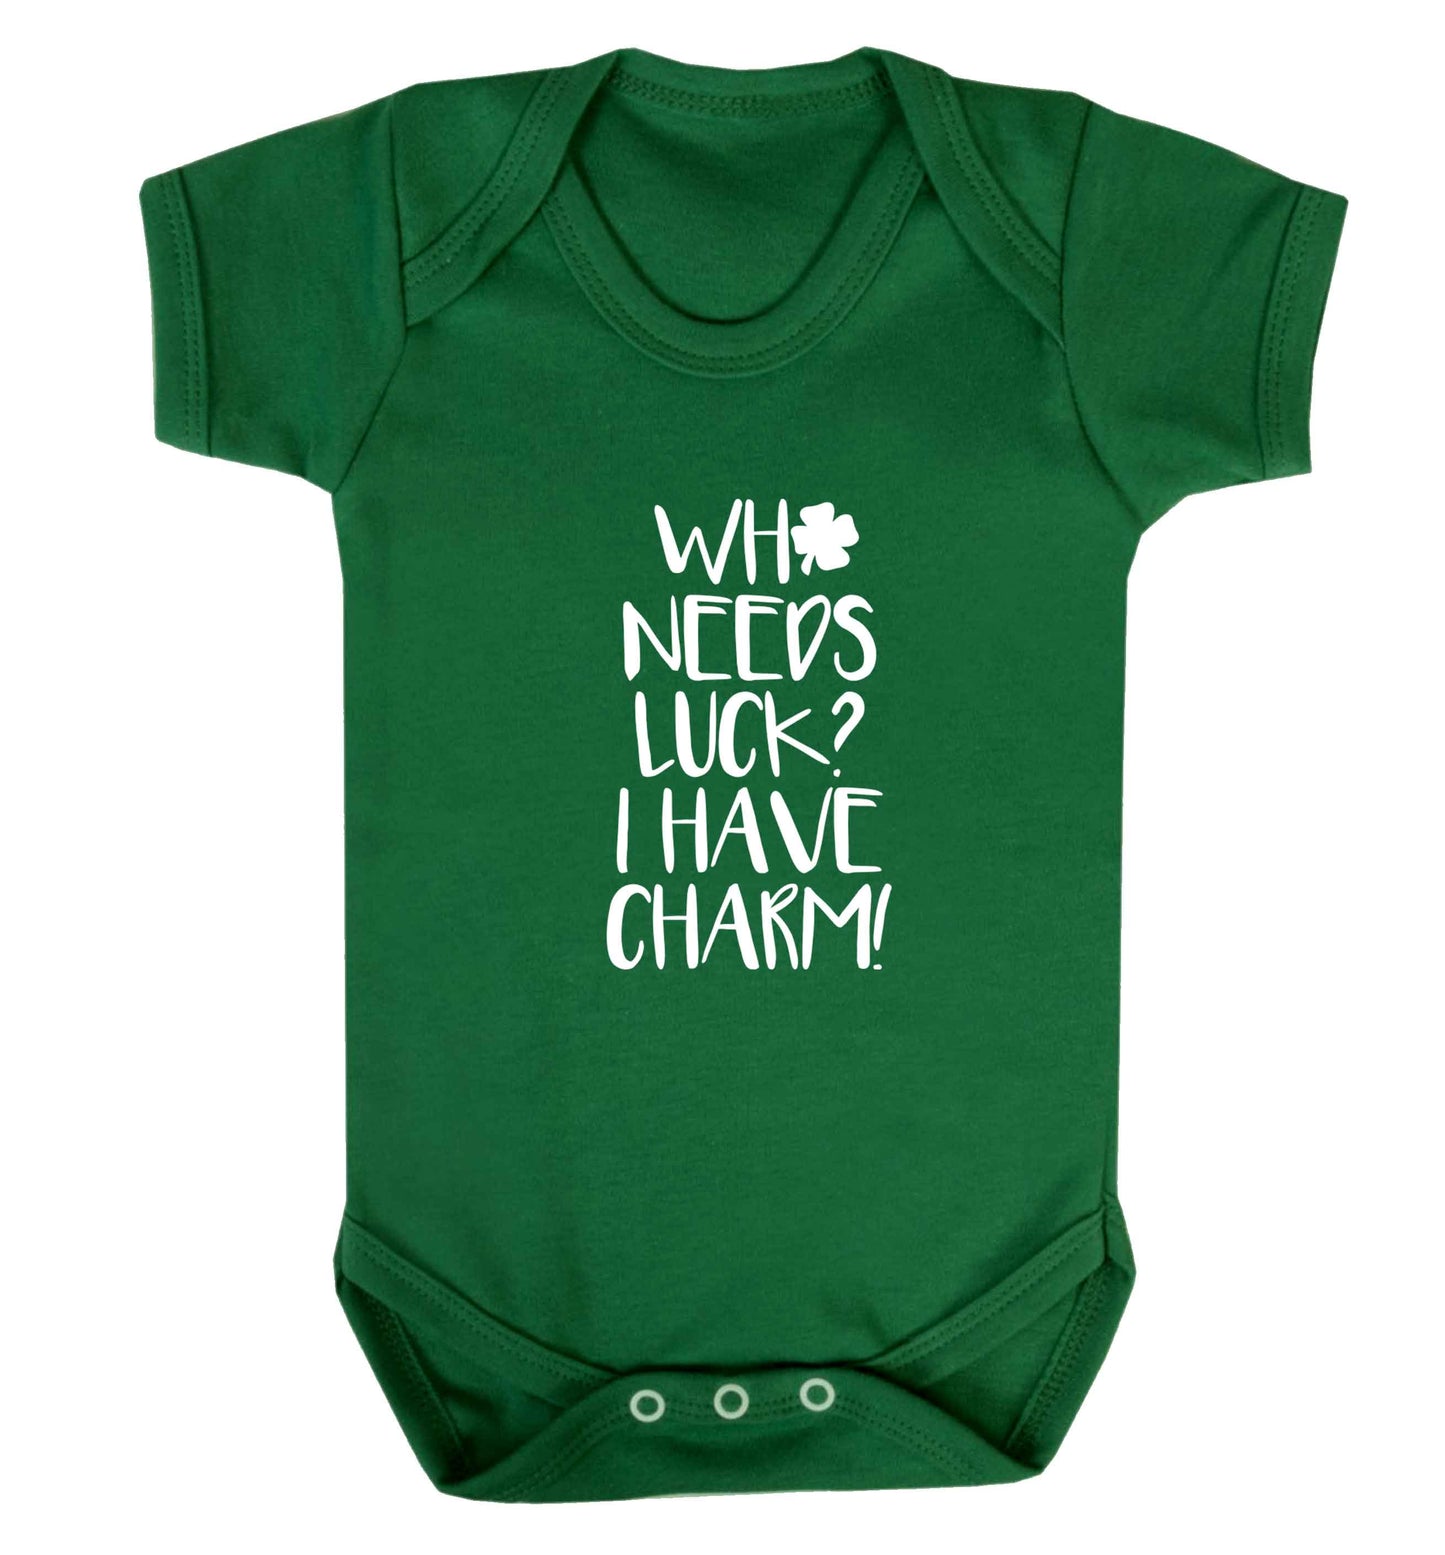 Who needs luck? I have charm! baby vest green 18-24 months